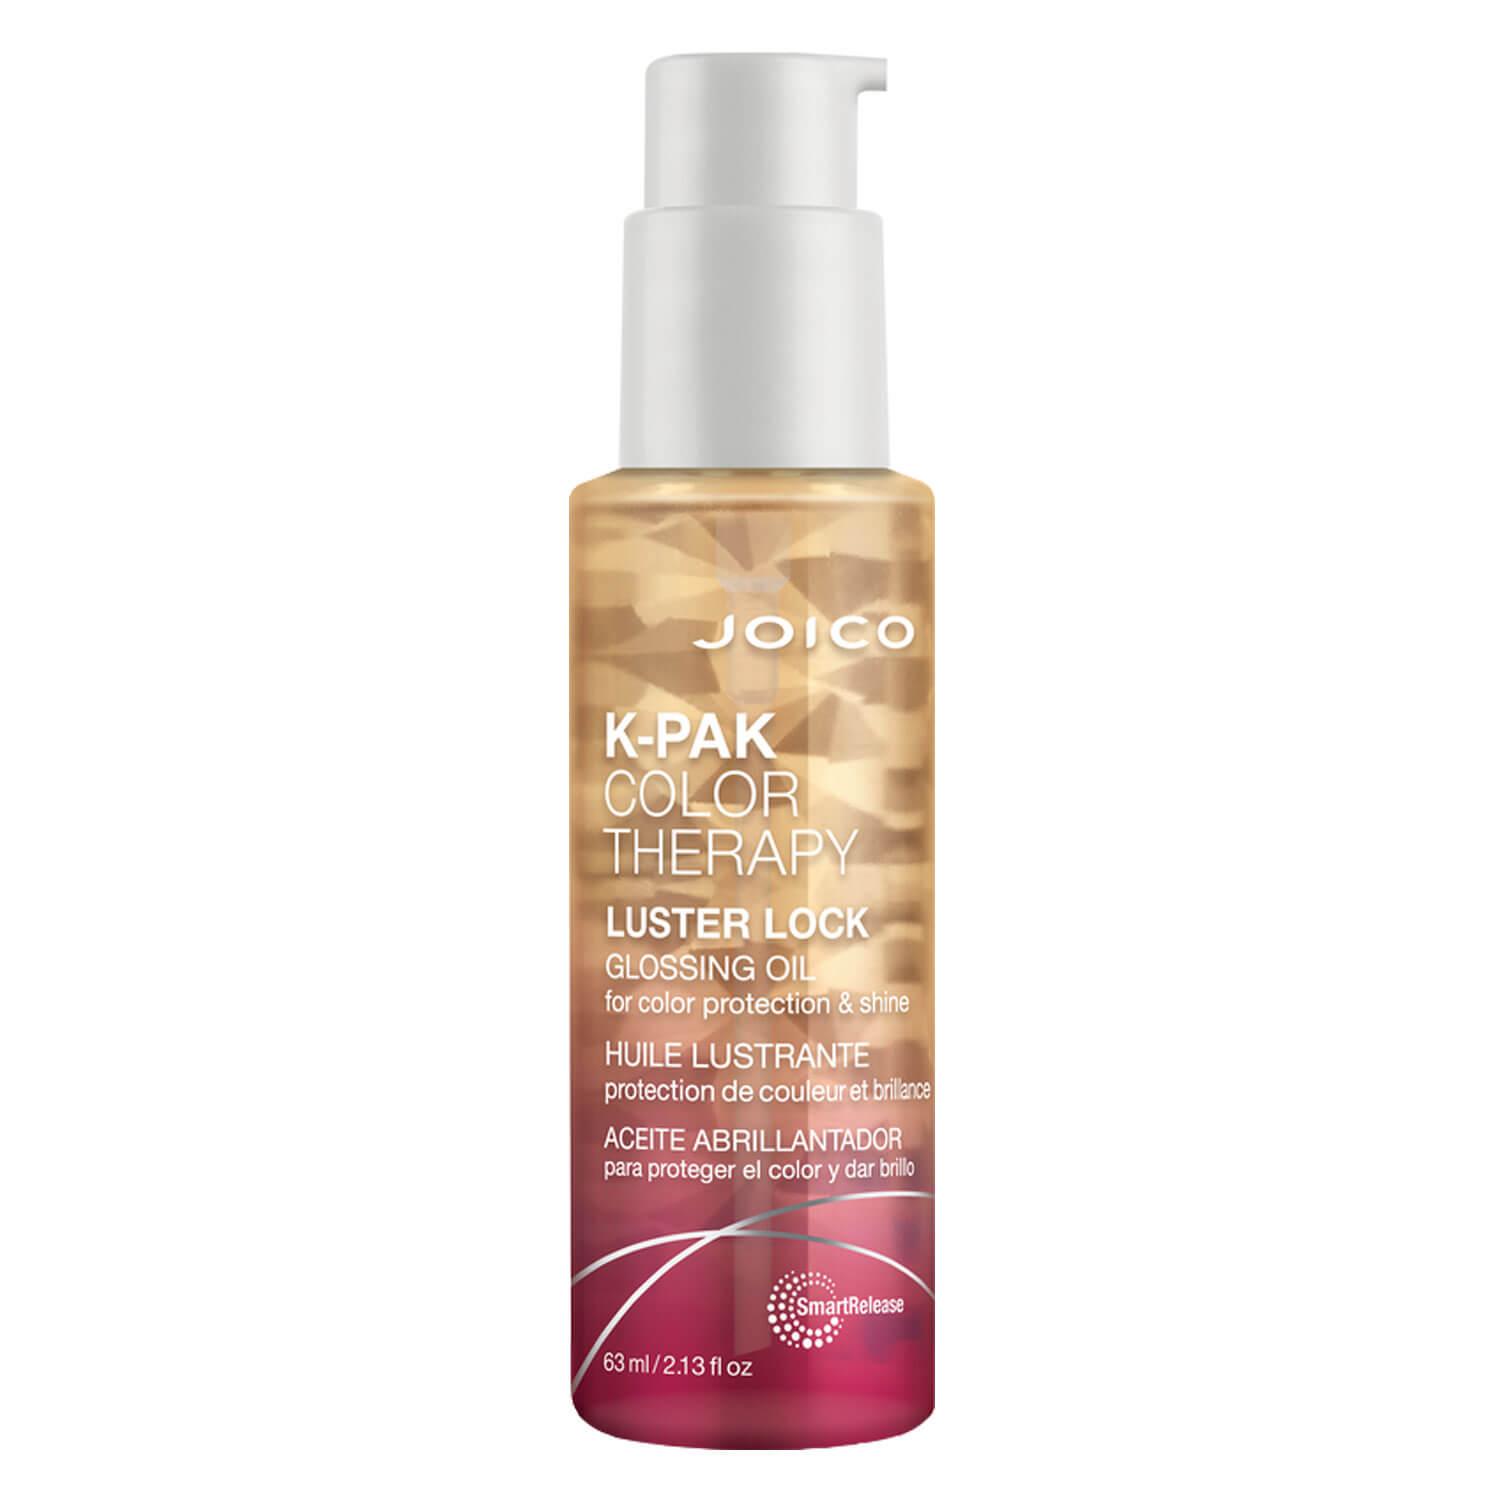 K-Pak - Color Therapy Luster Lock Glossing Oil